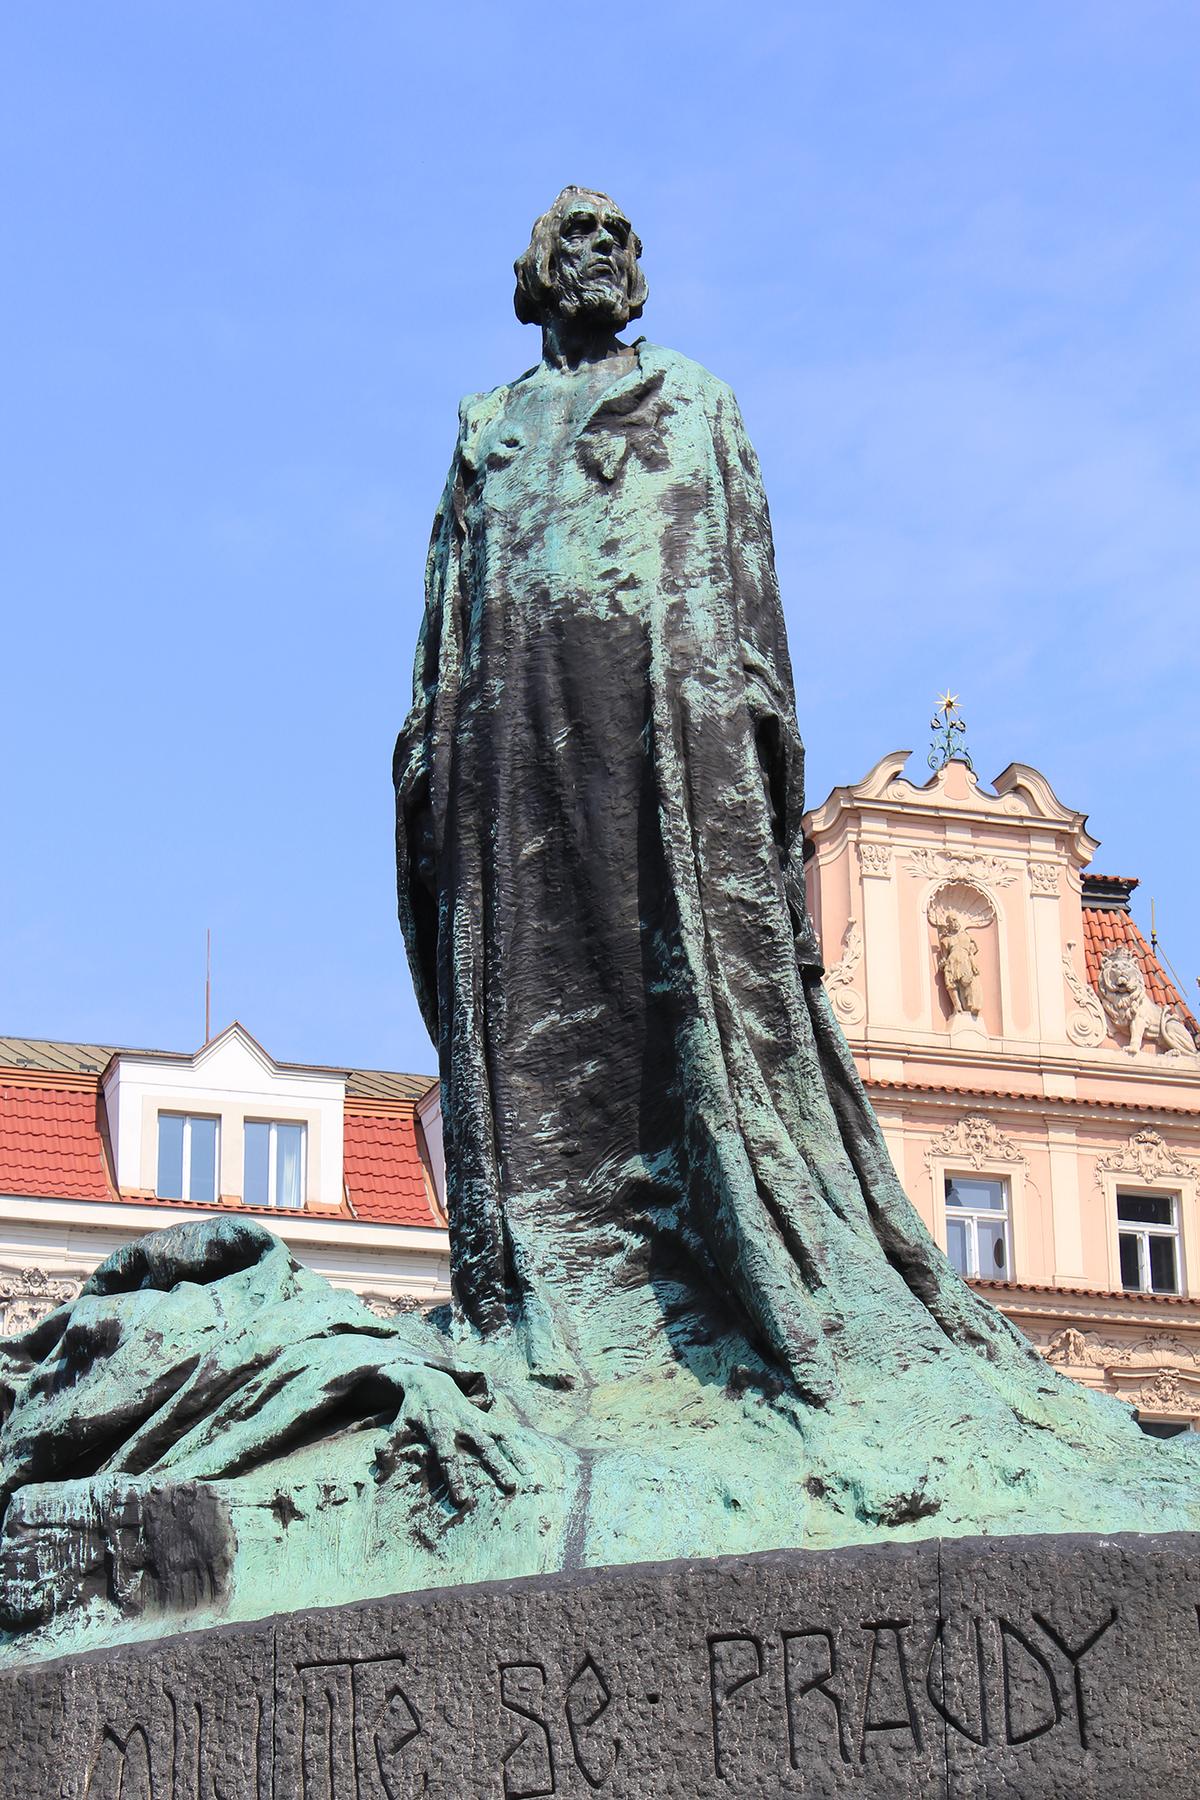 A monument to Jan Hus in Old Town Square, Prague. (Oyvind Holmstad/CC BY-SA 3.0)